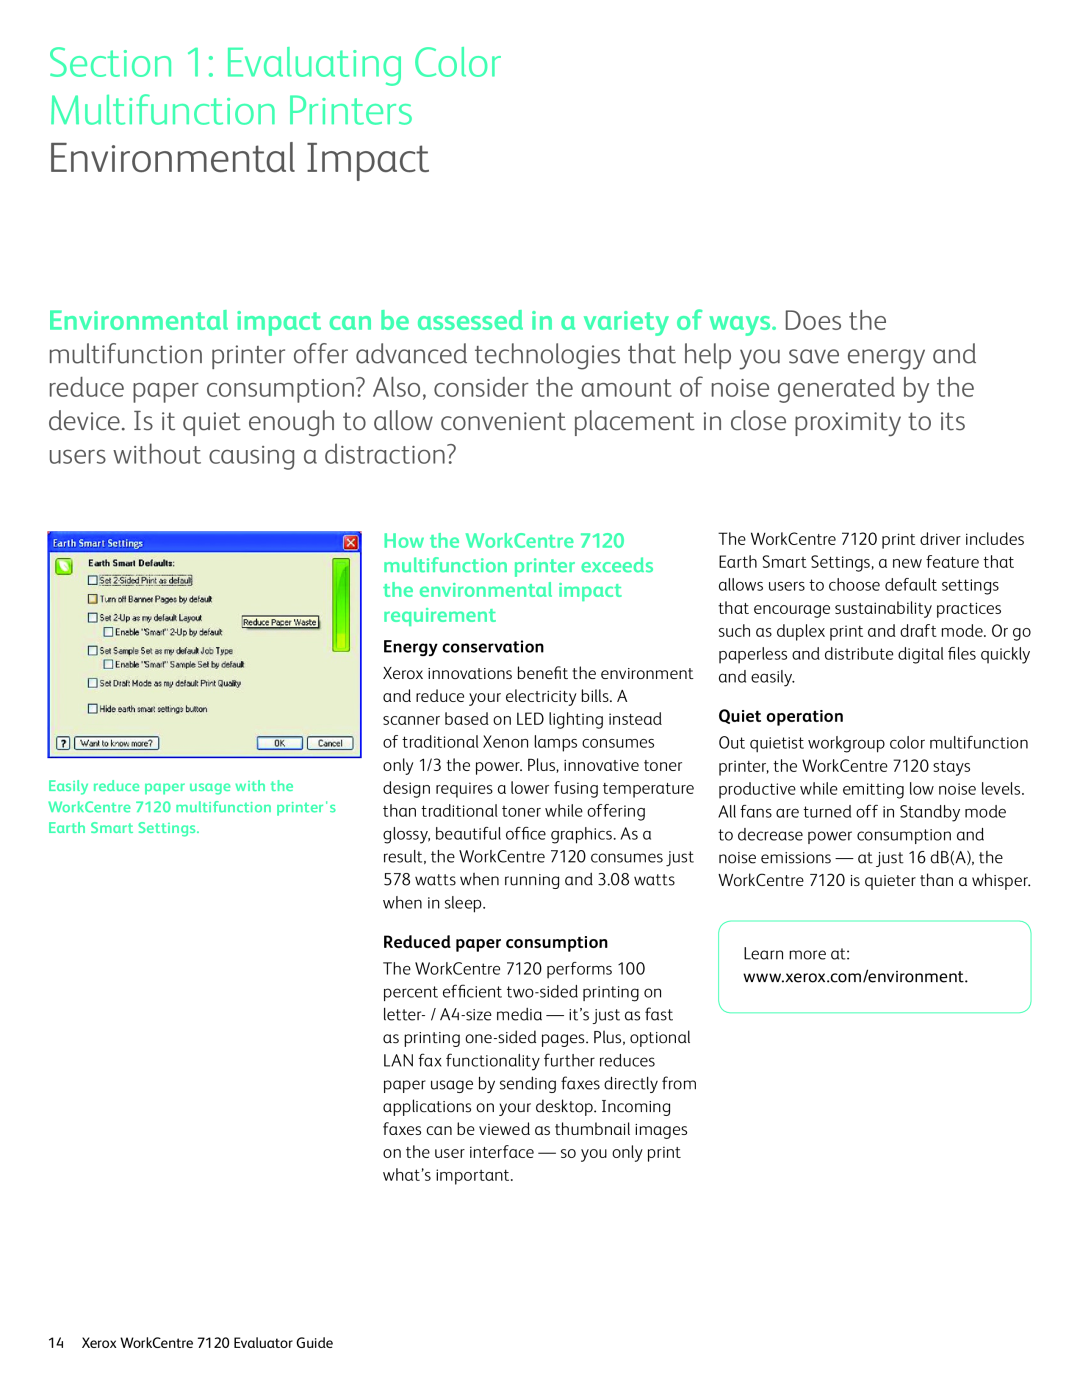 Xerox 7120 manual Environmental Impact, Energy conservation, Quiet operation, Reduced paper consumption 